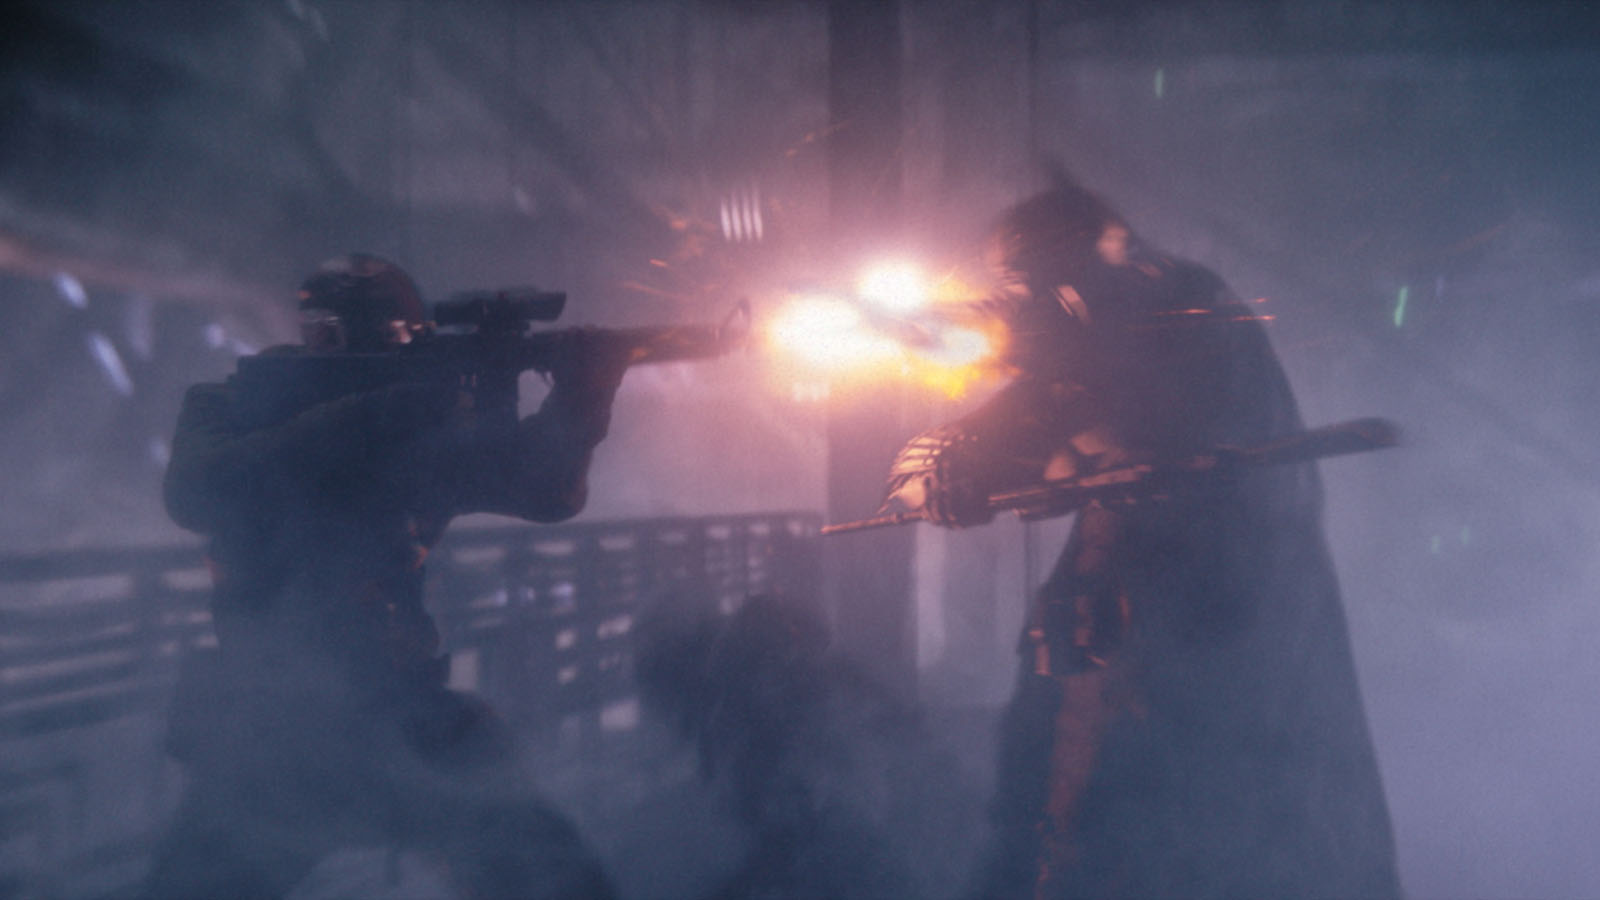 Some muzzle flashes are VFX…